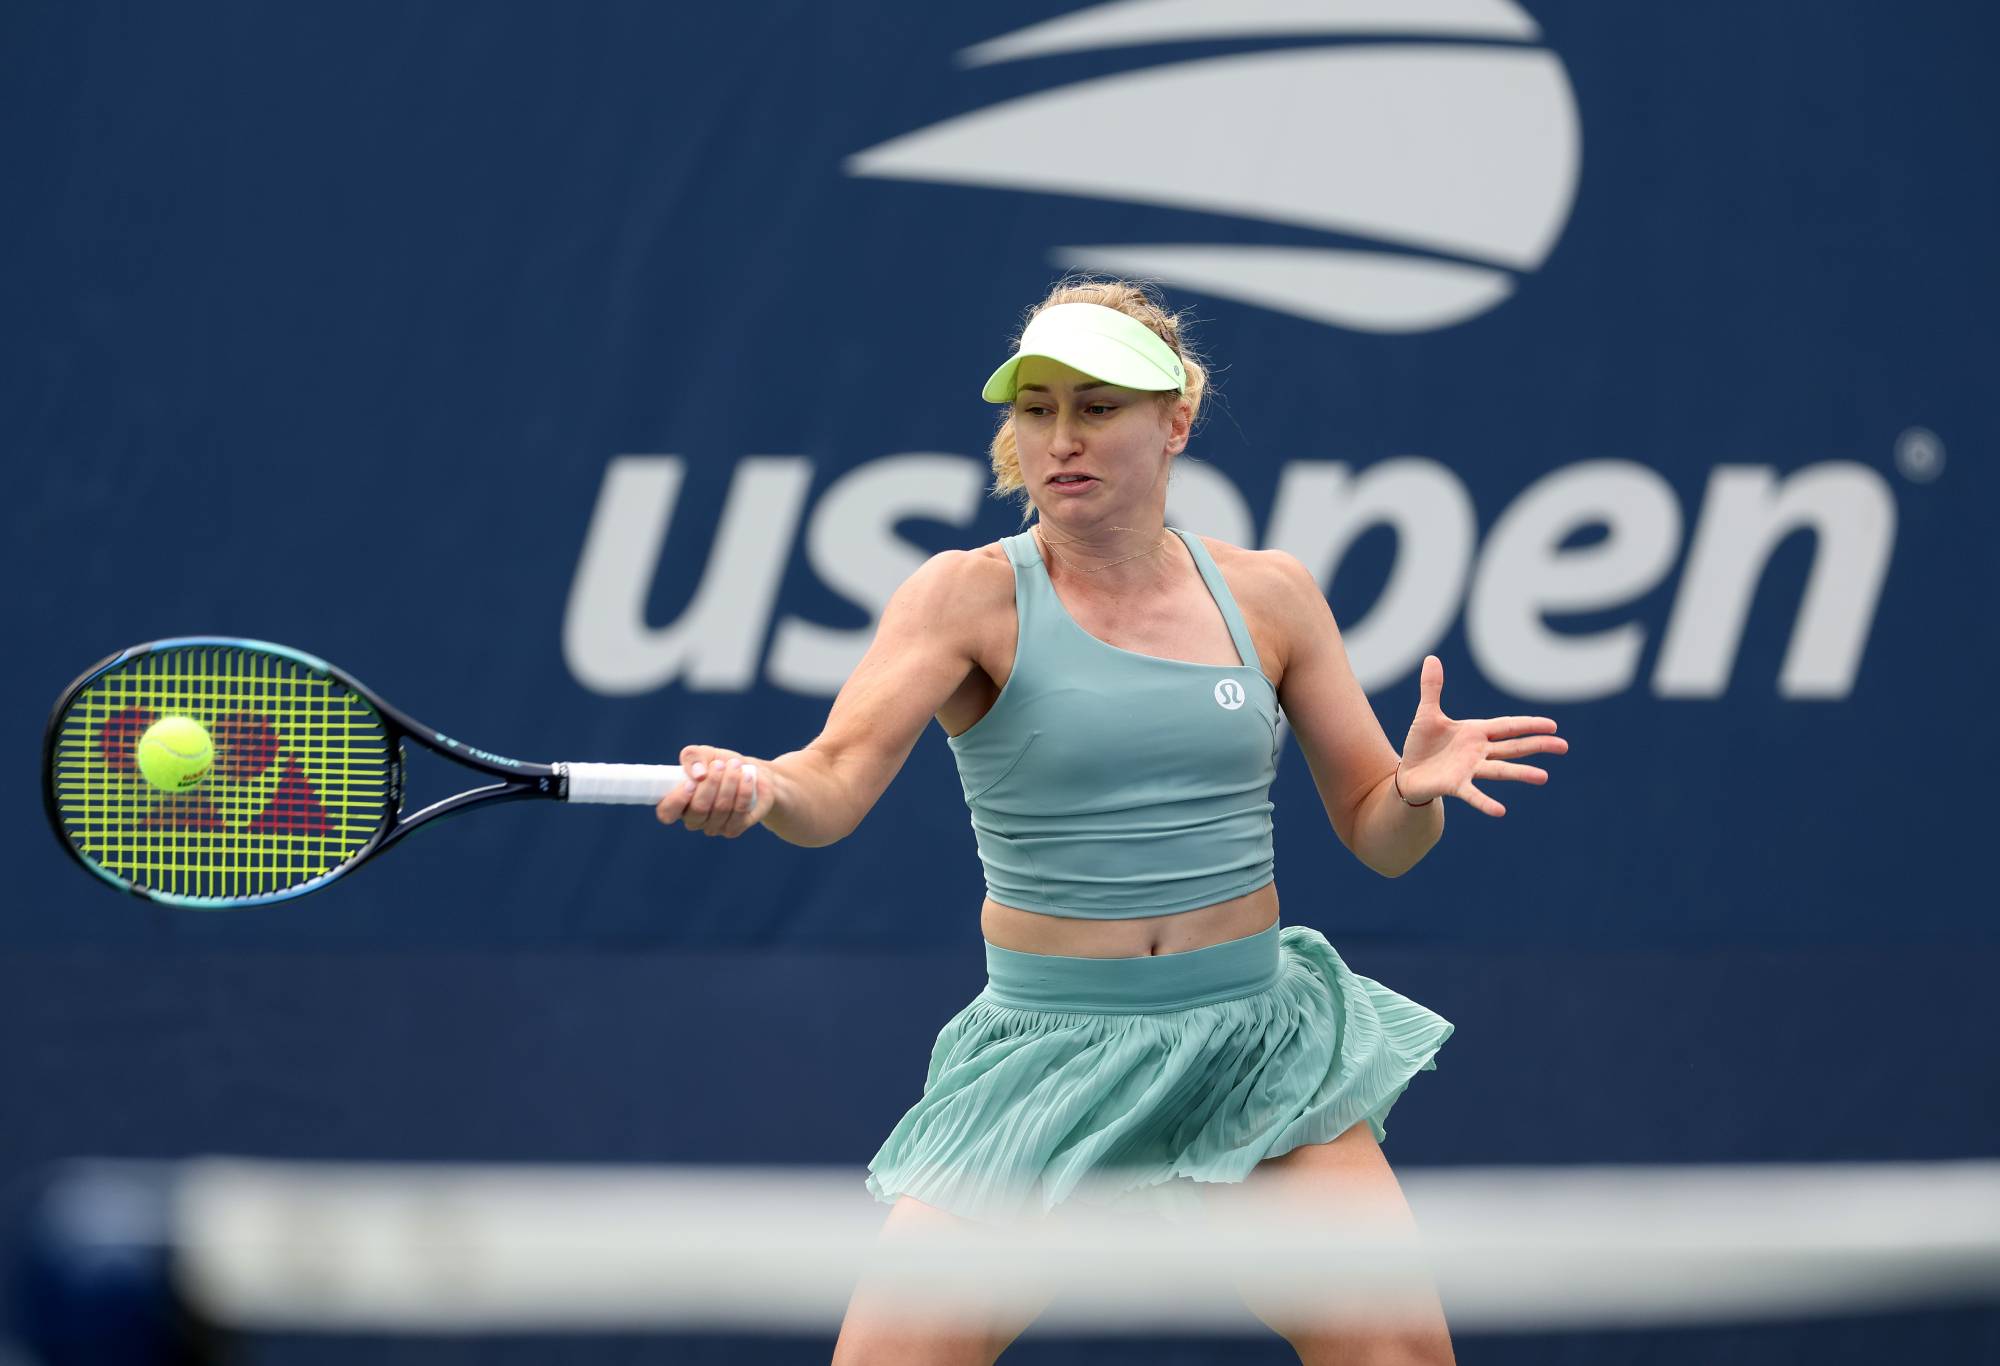 NEW YORK, NEW YORK - AUGUST 28: Daria Saville of Australia returns a shot against Clervie Ngounoue of the United States during their Women's Singles First Round match on Day One of the 2023 US Open at the USTA Billie Jean King National Tennis Center on August 28, 2023 in the Flushing neighborhood of the Queens borough of New York City. (Photo by Matthew Stockman/Getty Images)